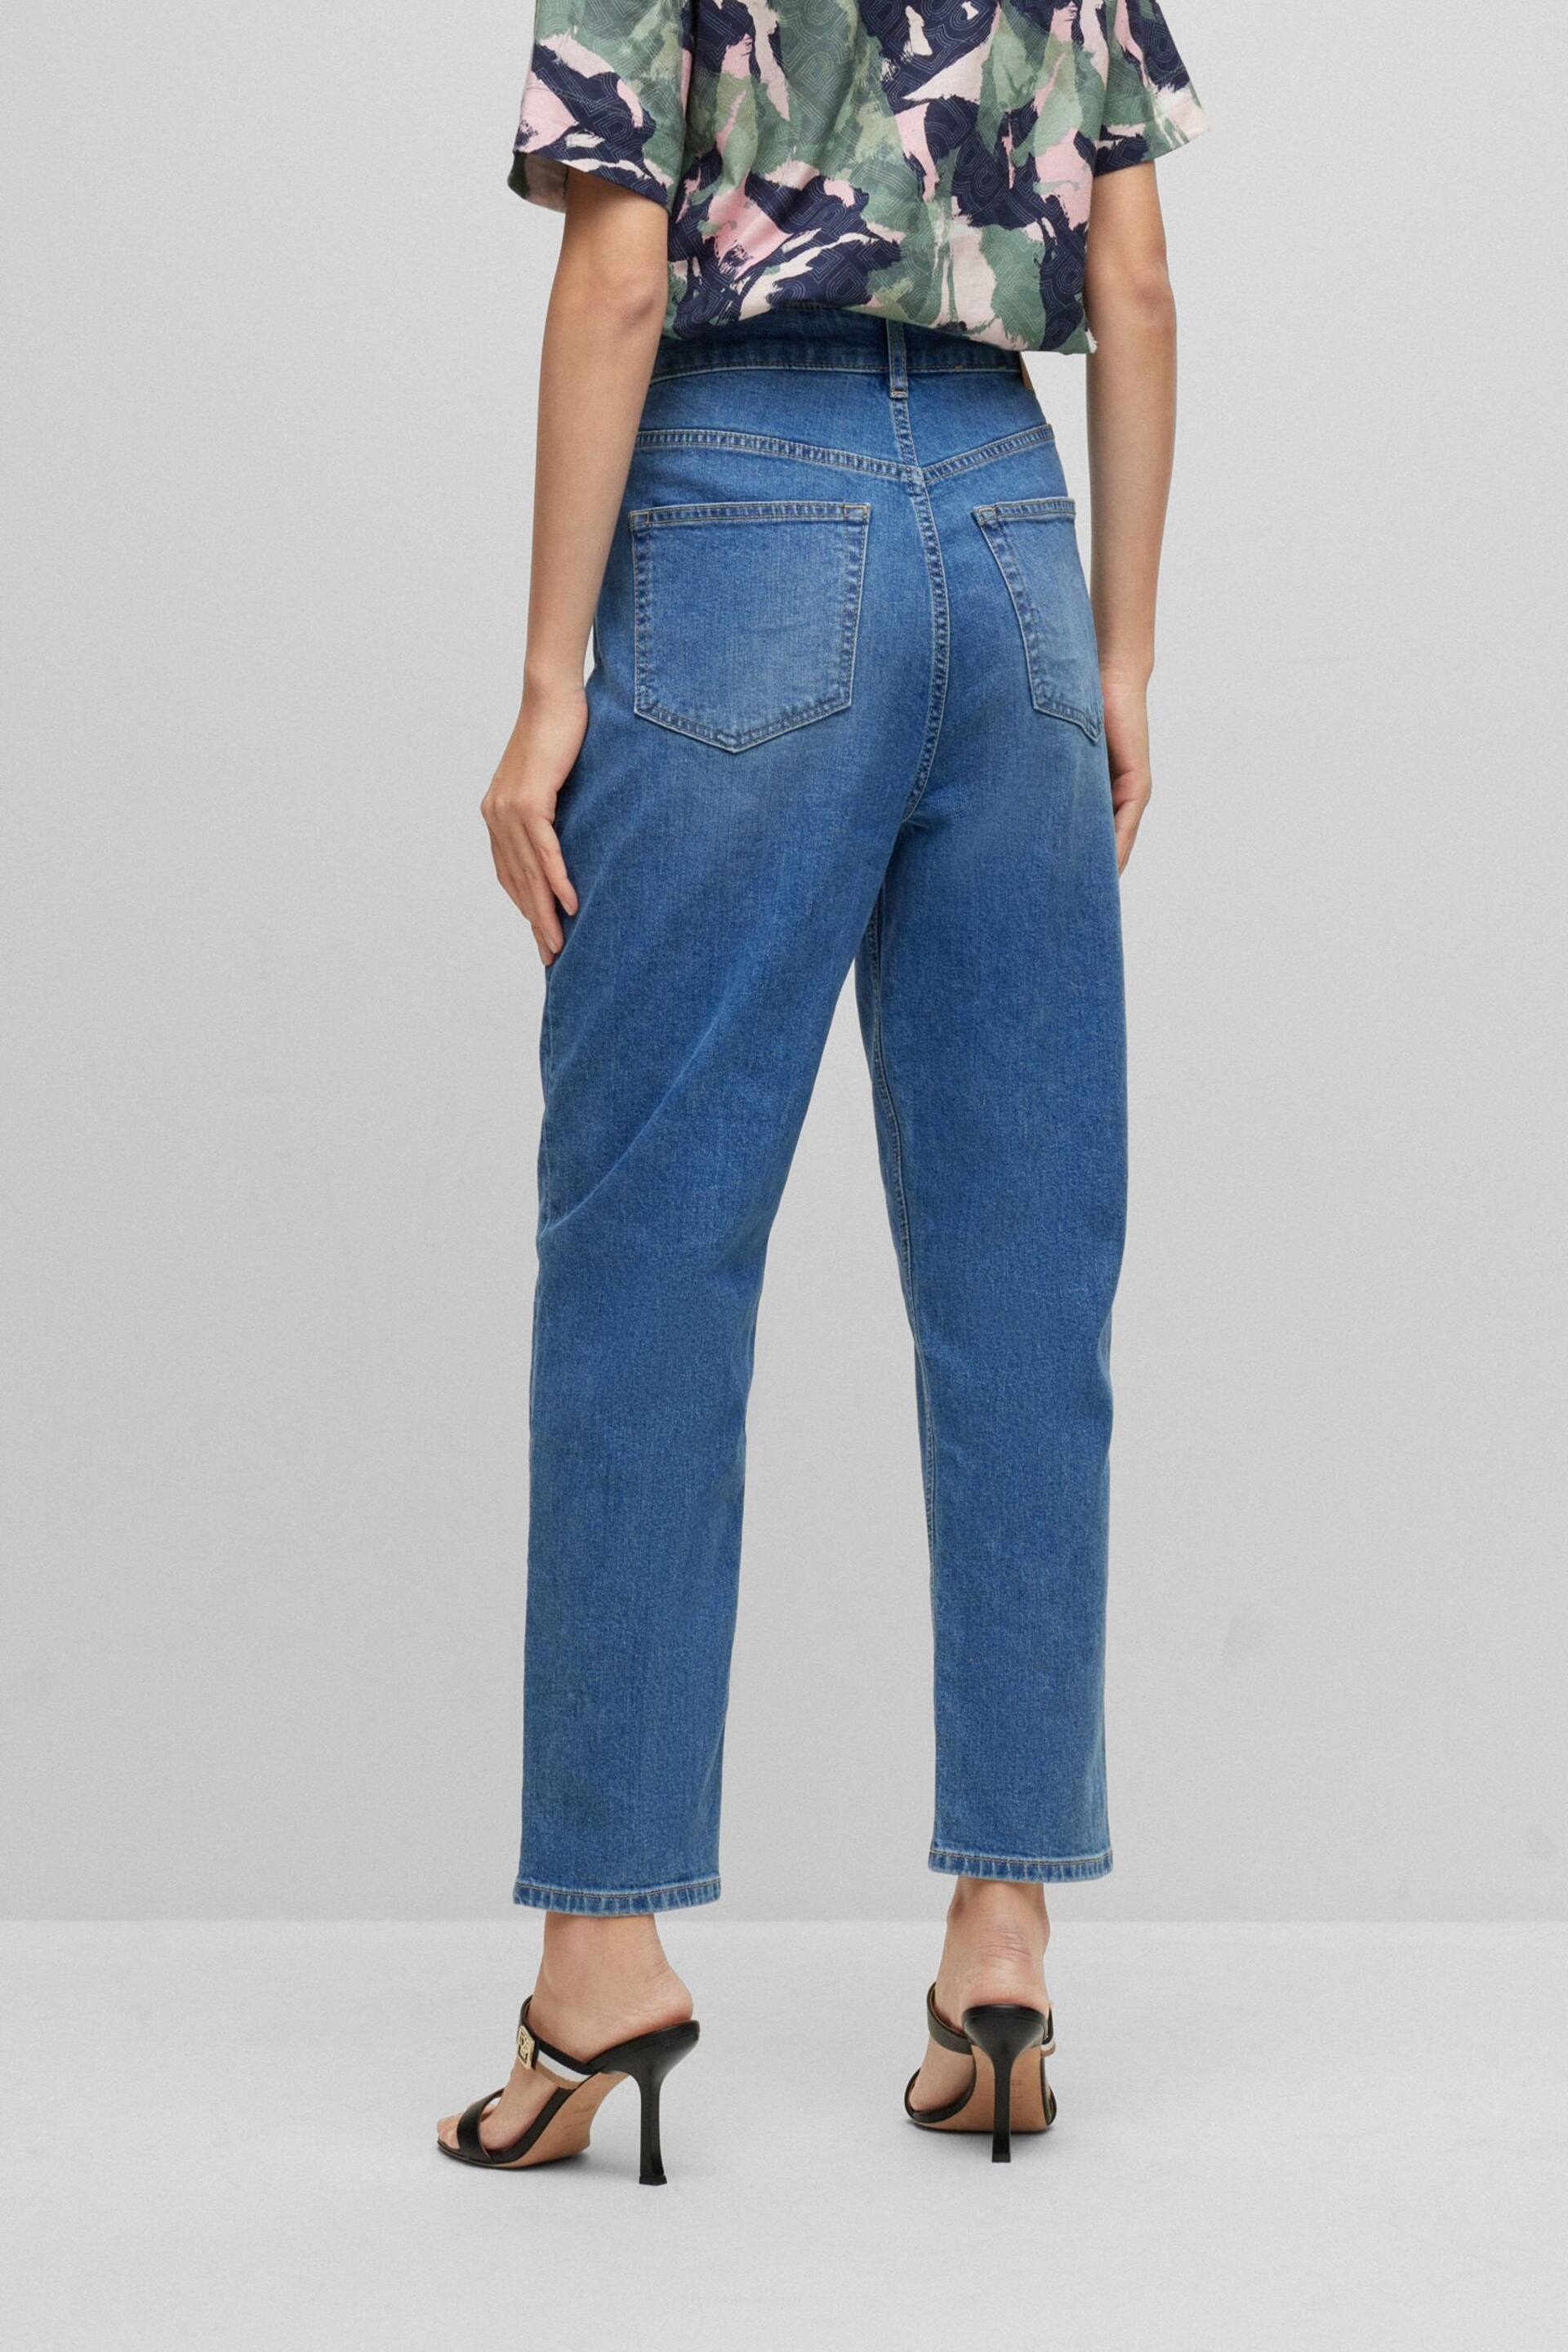 BOSS Blue Ruth Regular Fit High Waisted Stretch Jeans - Image 2 of 5